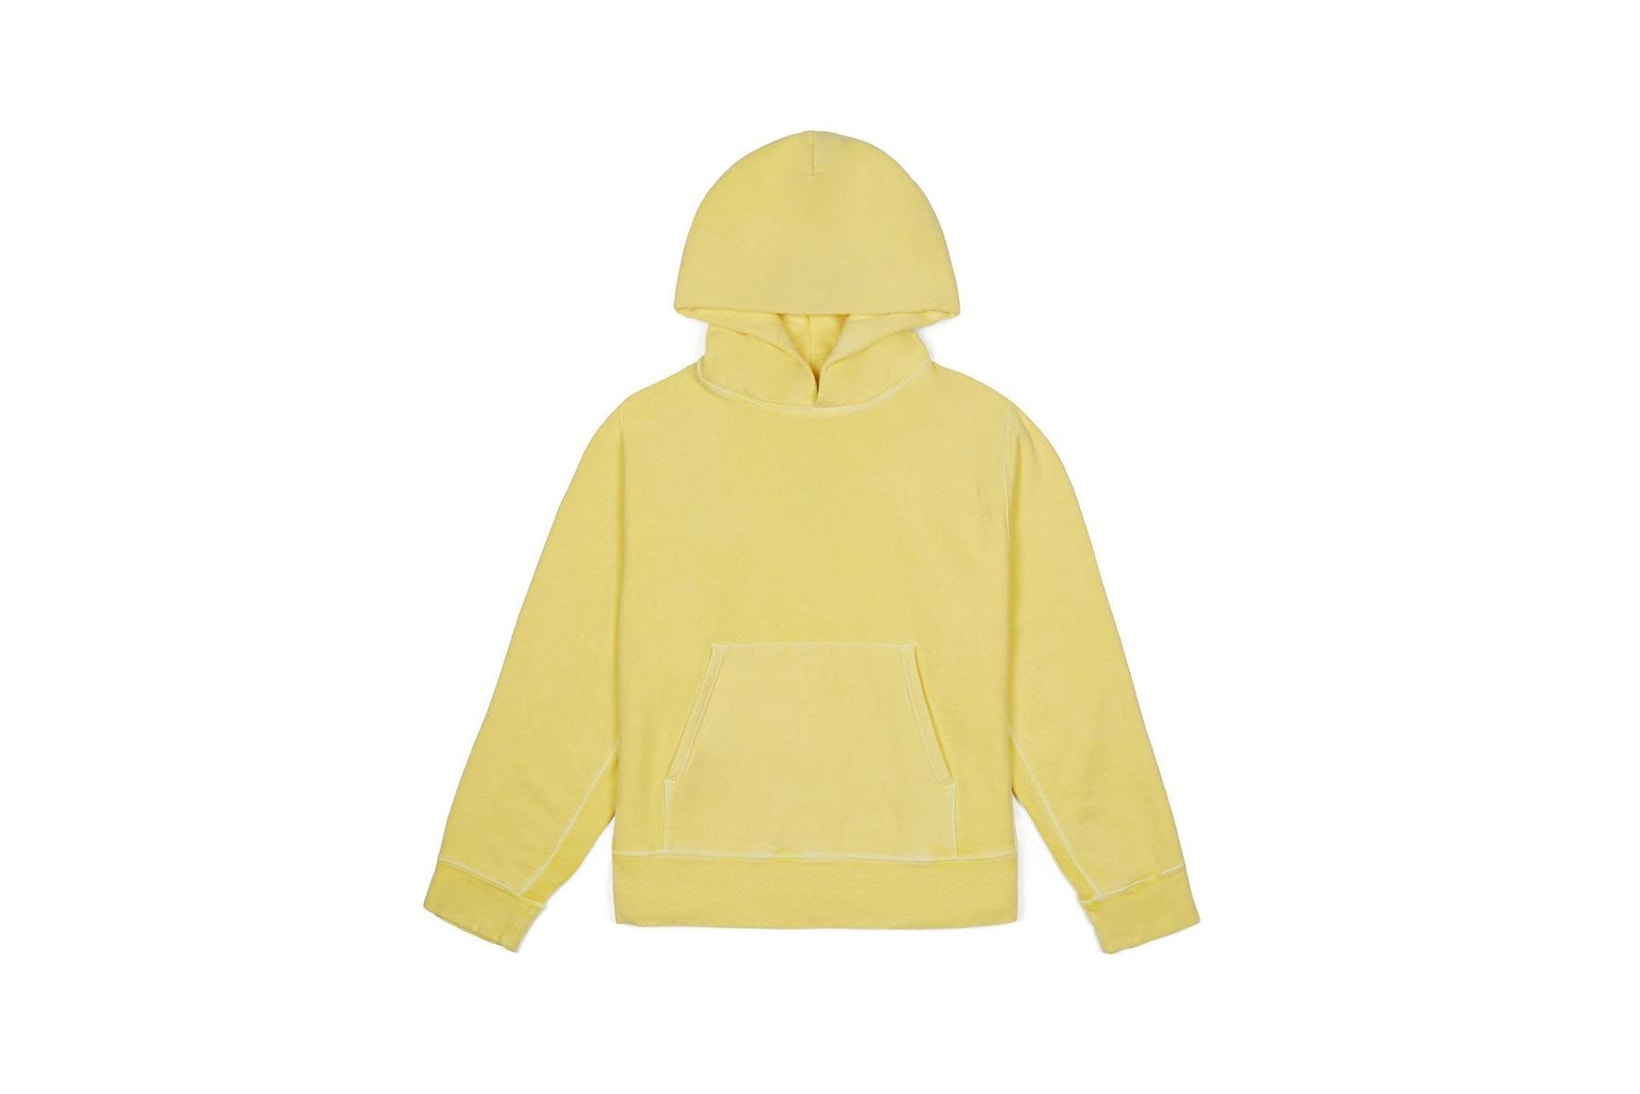 YEEZY Hoodies On Sale at Discounted Prices | Hypebae